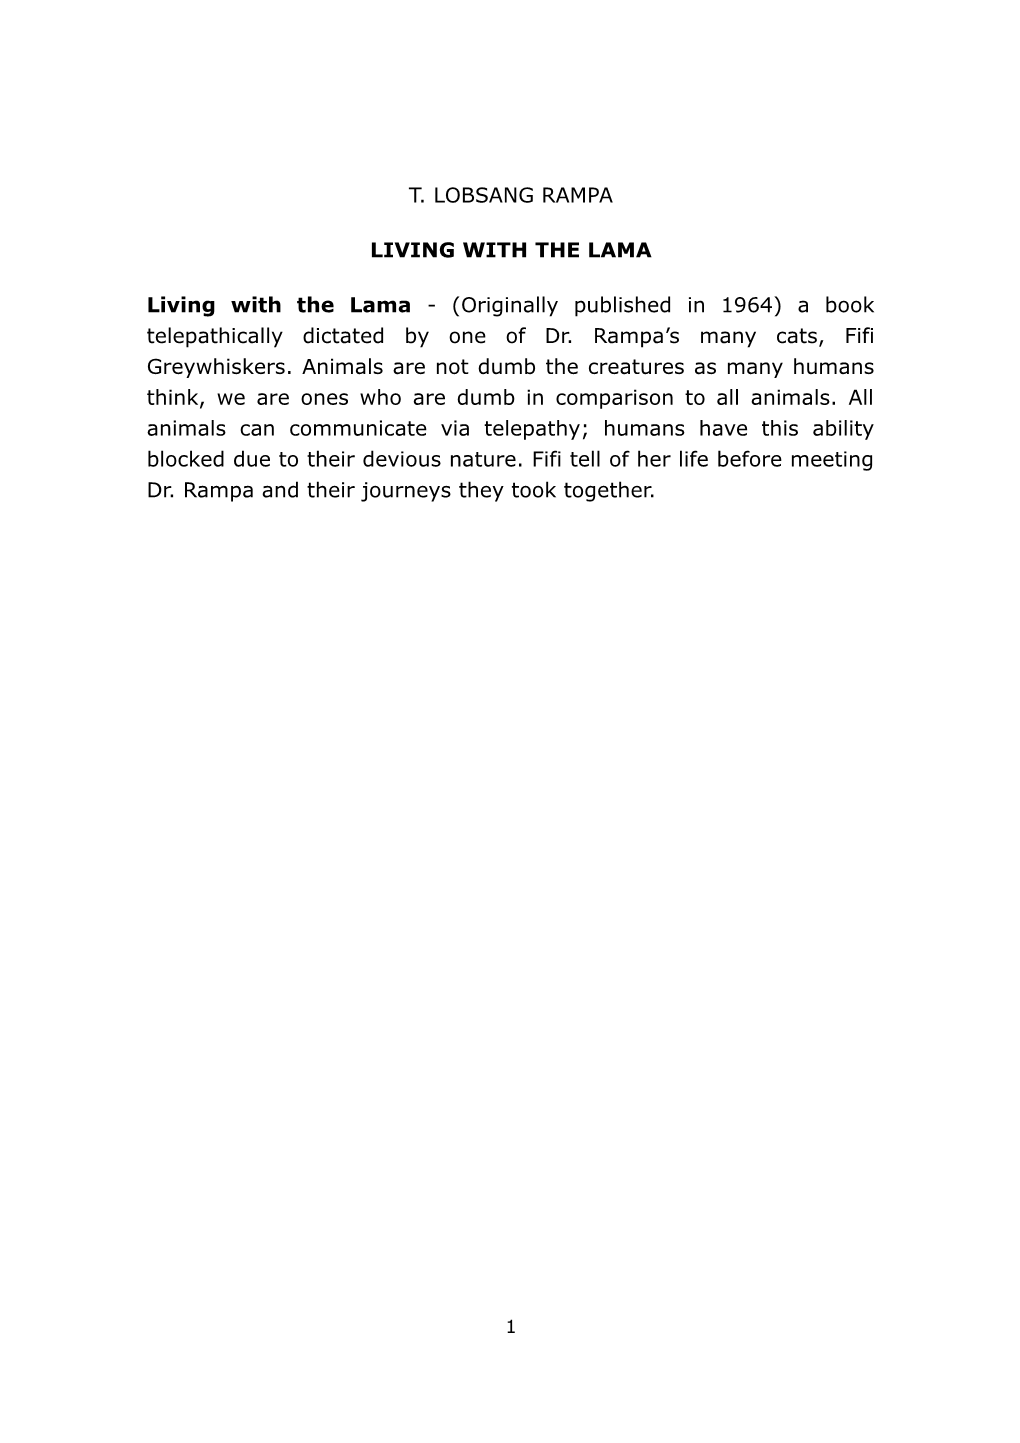 Living with the Lama (1964)